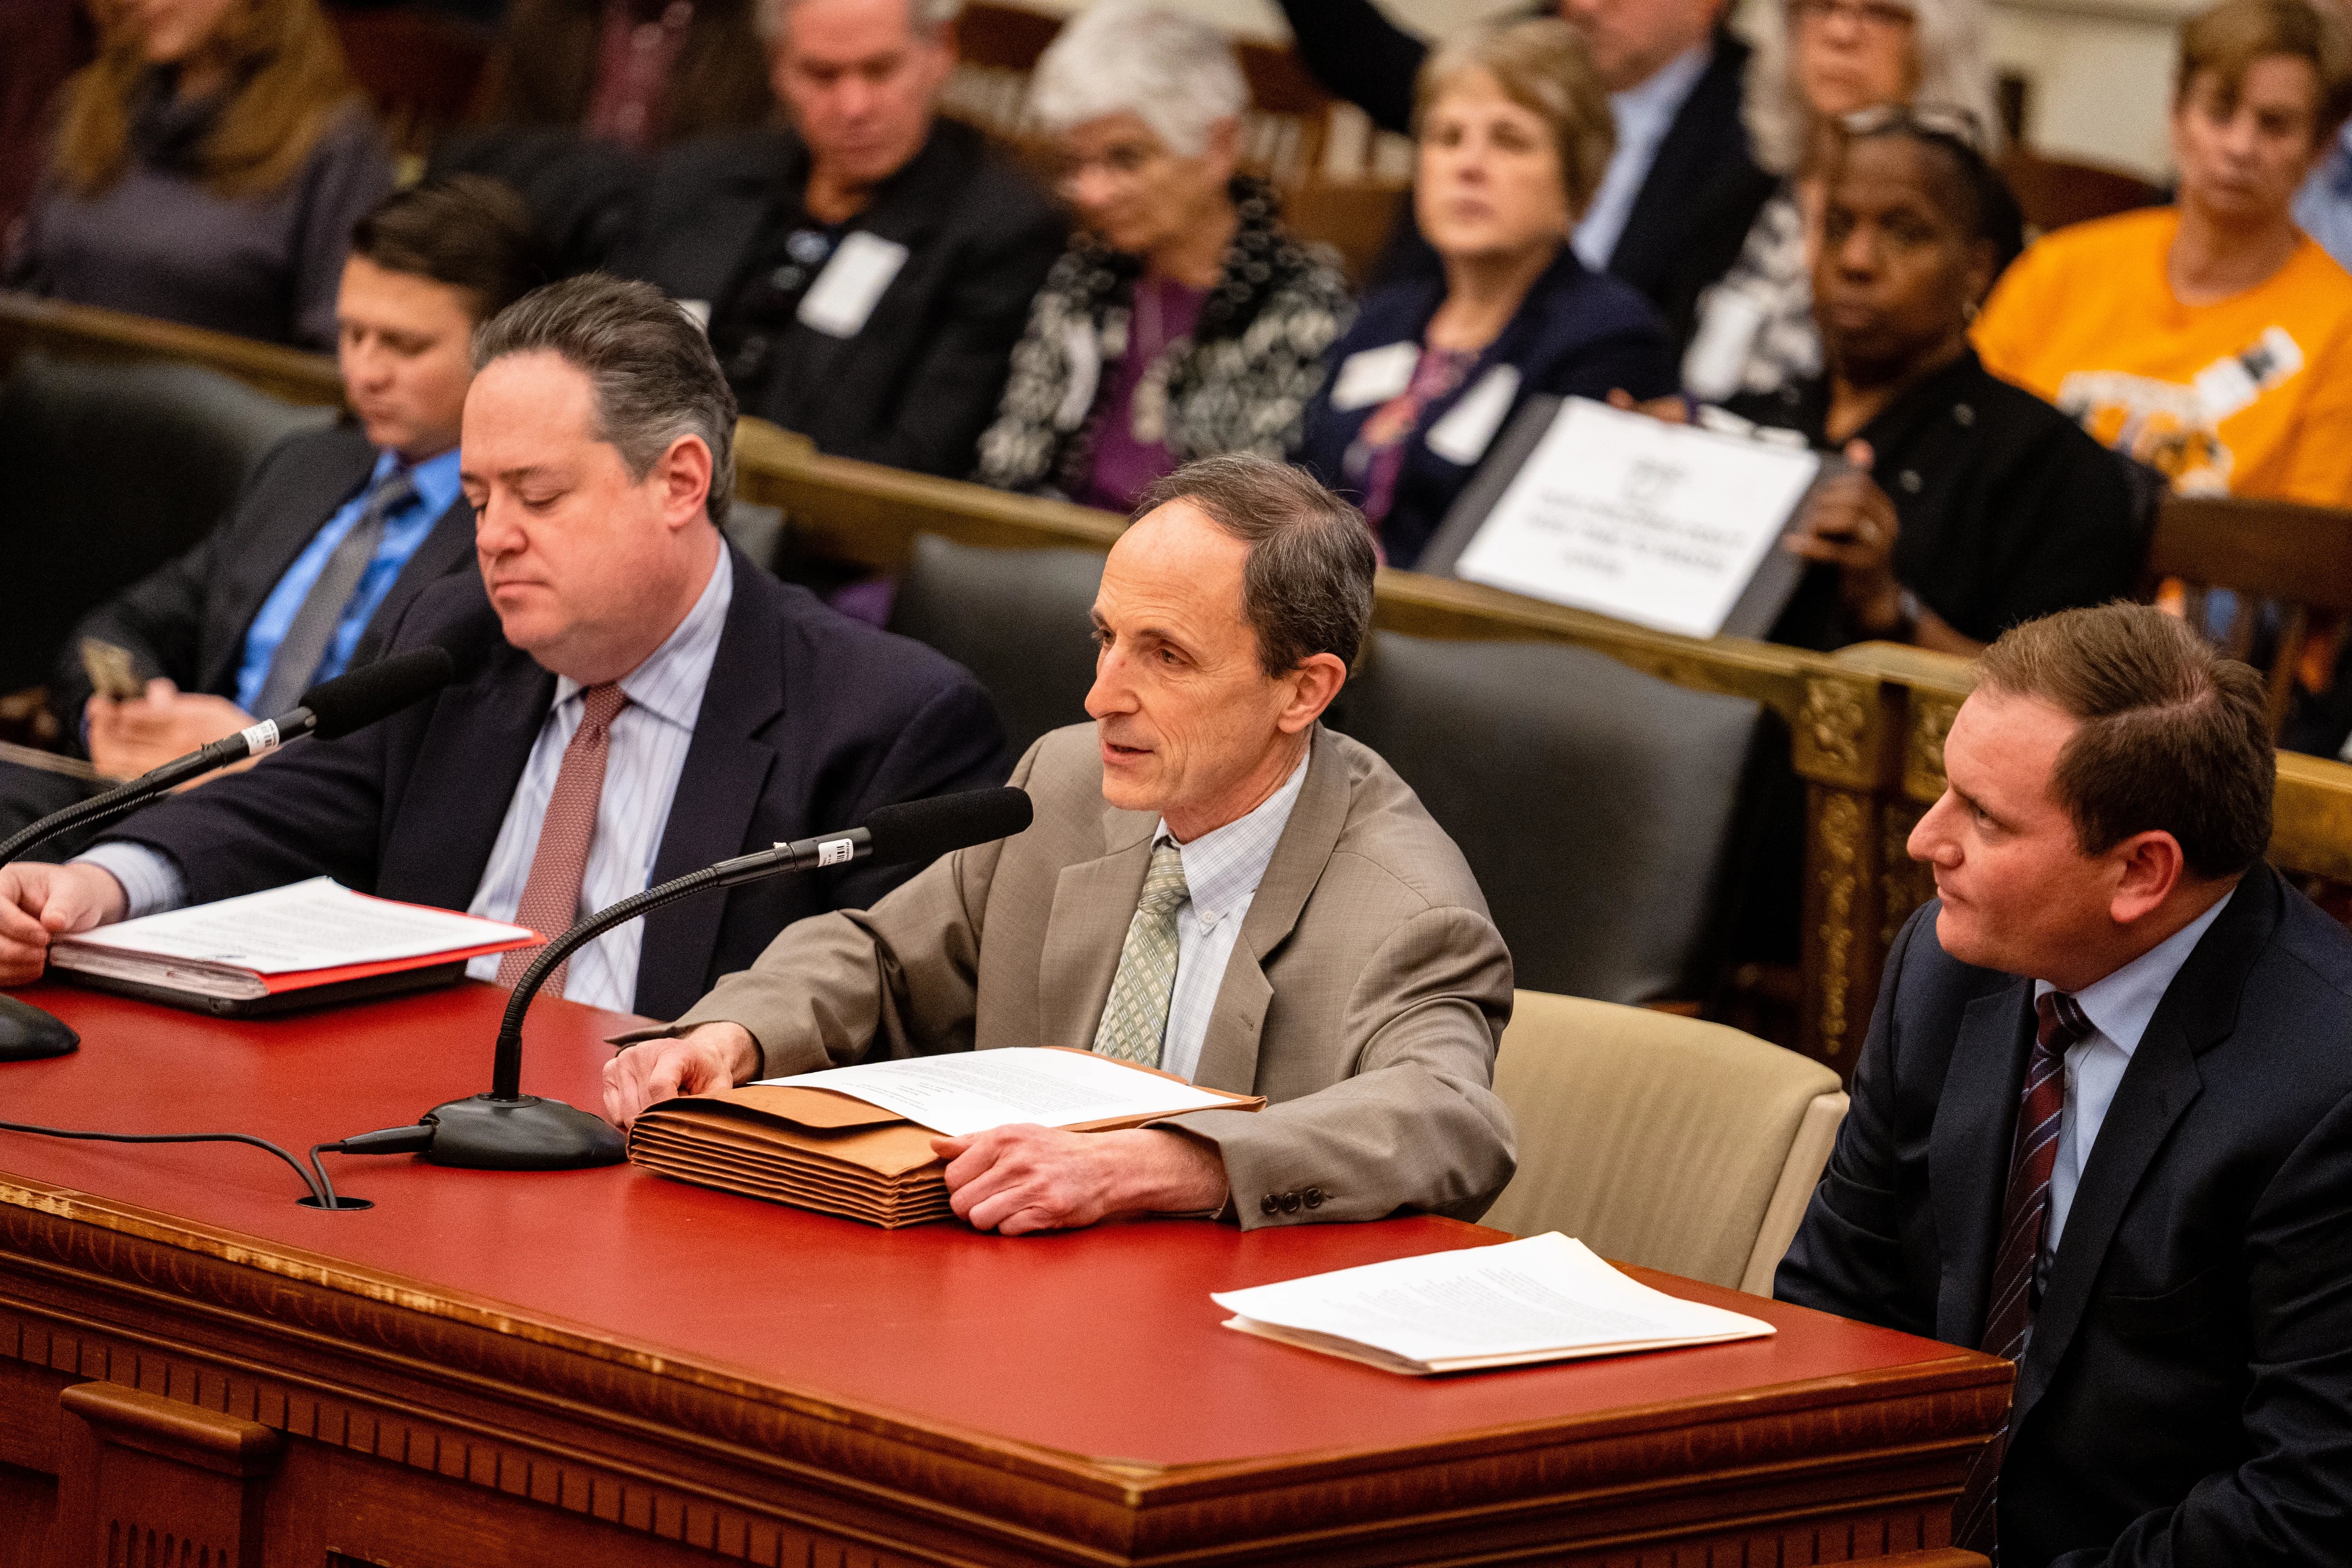 Rob Dubow, the city’s finance director, speaks at a City Council hearing in 2019.